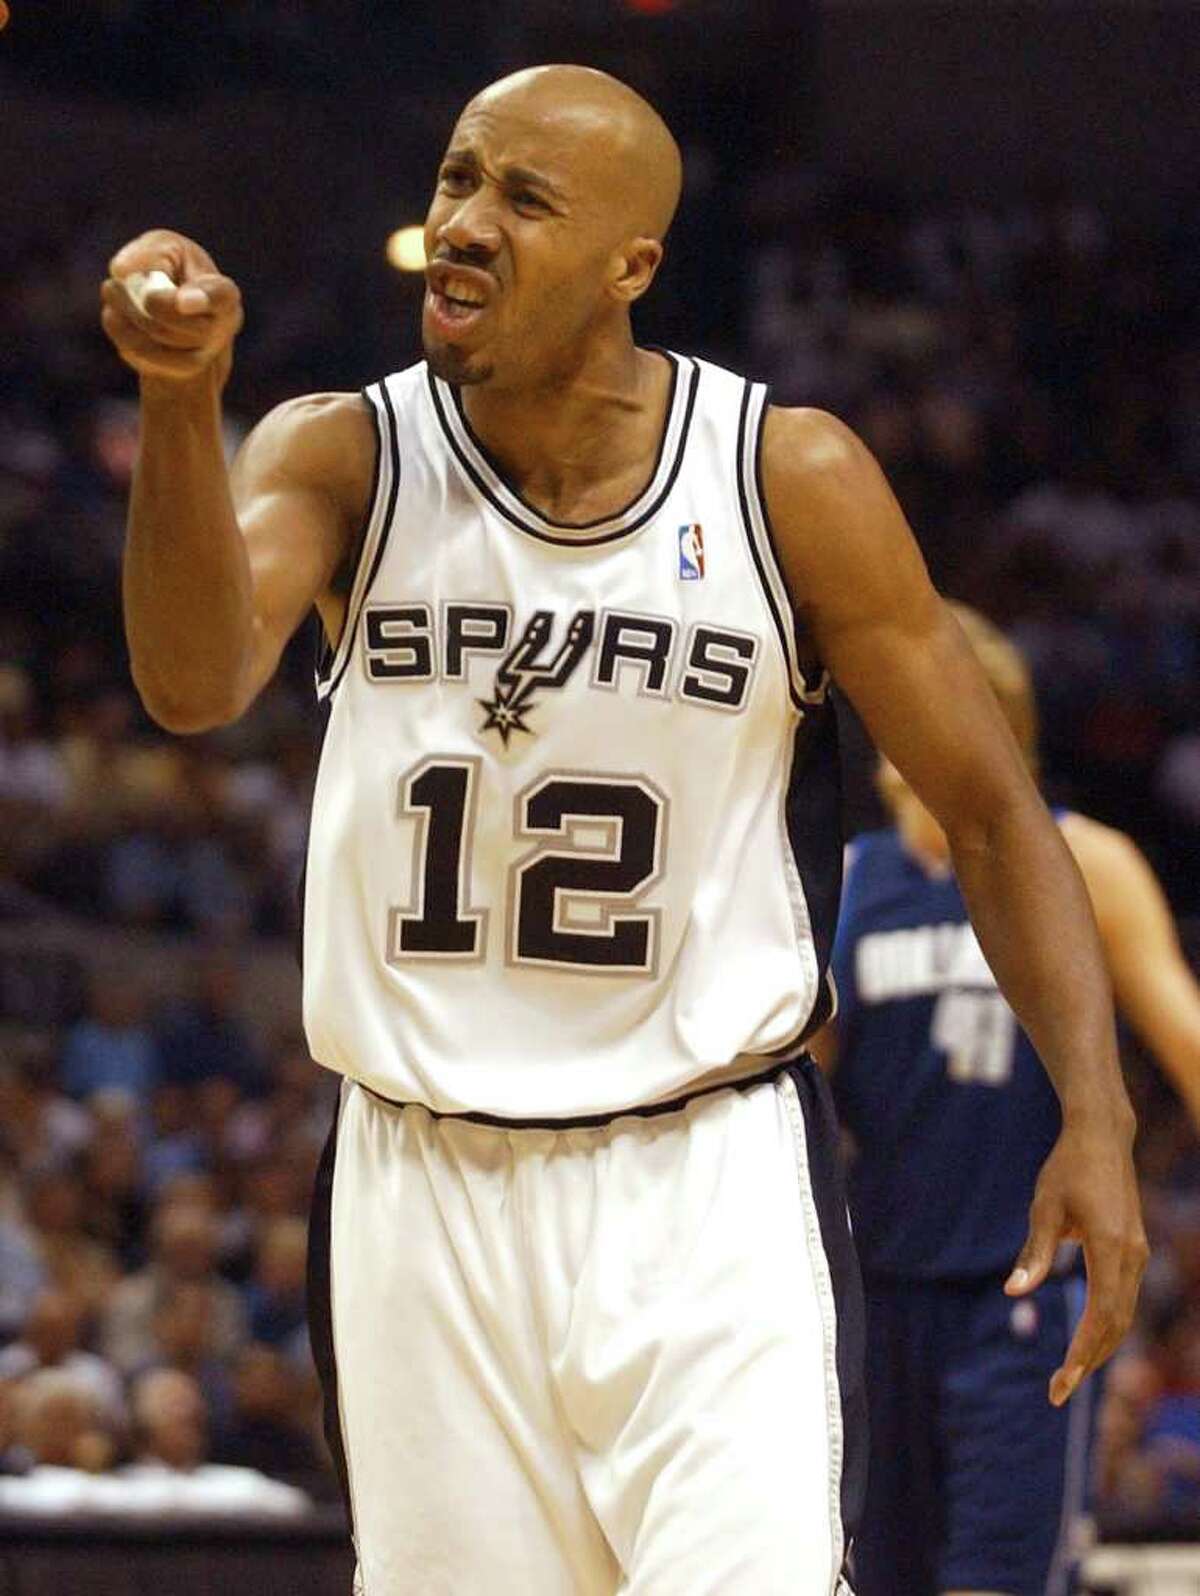 Spurs' Bruce Bowen argues a foul call against Dallas Mavericks' in the third quarter at game 1 of the Western Conference Finals at the SBC Center in San Antonio on Monday, May 19, 2003. (Kin Man Hui/Staff)